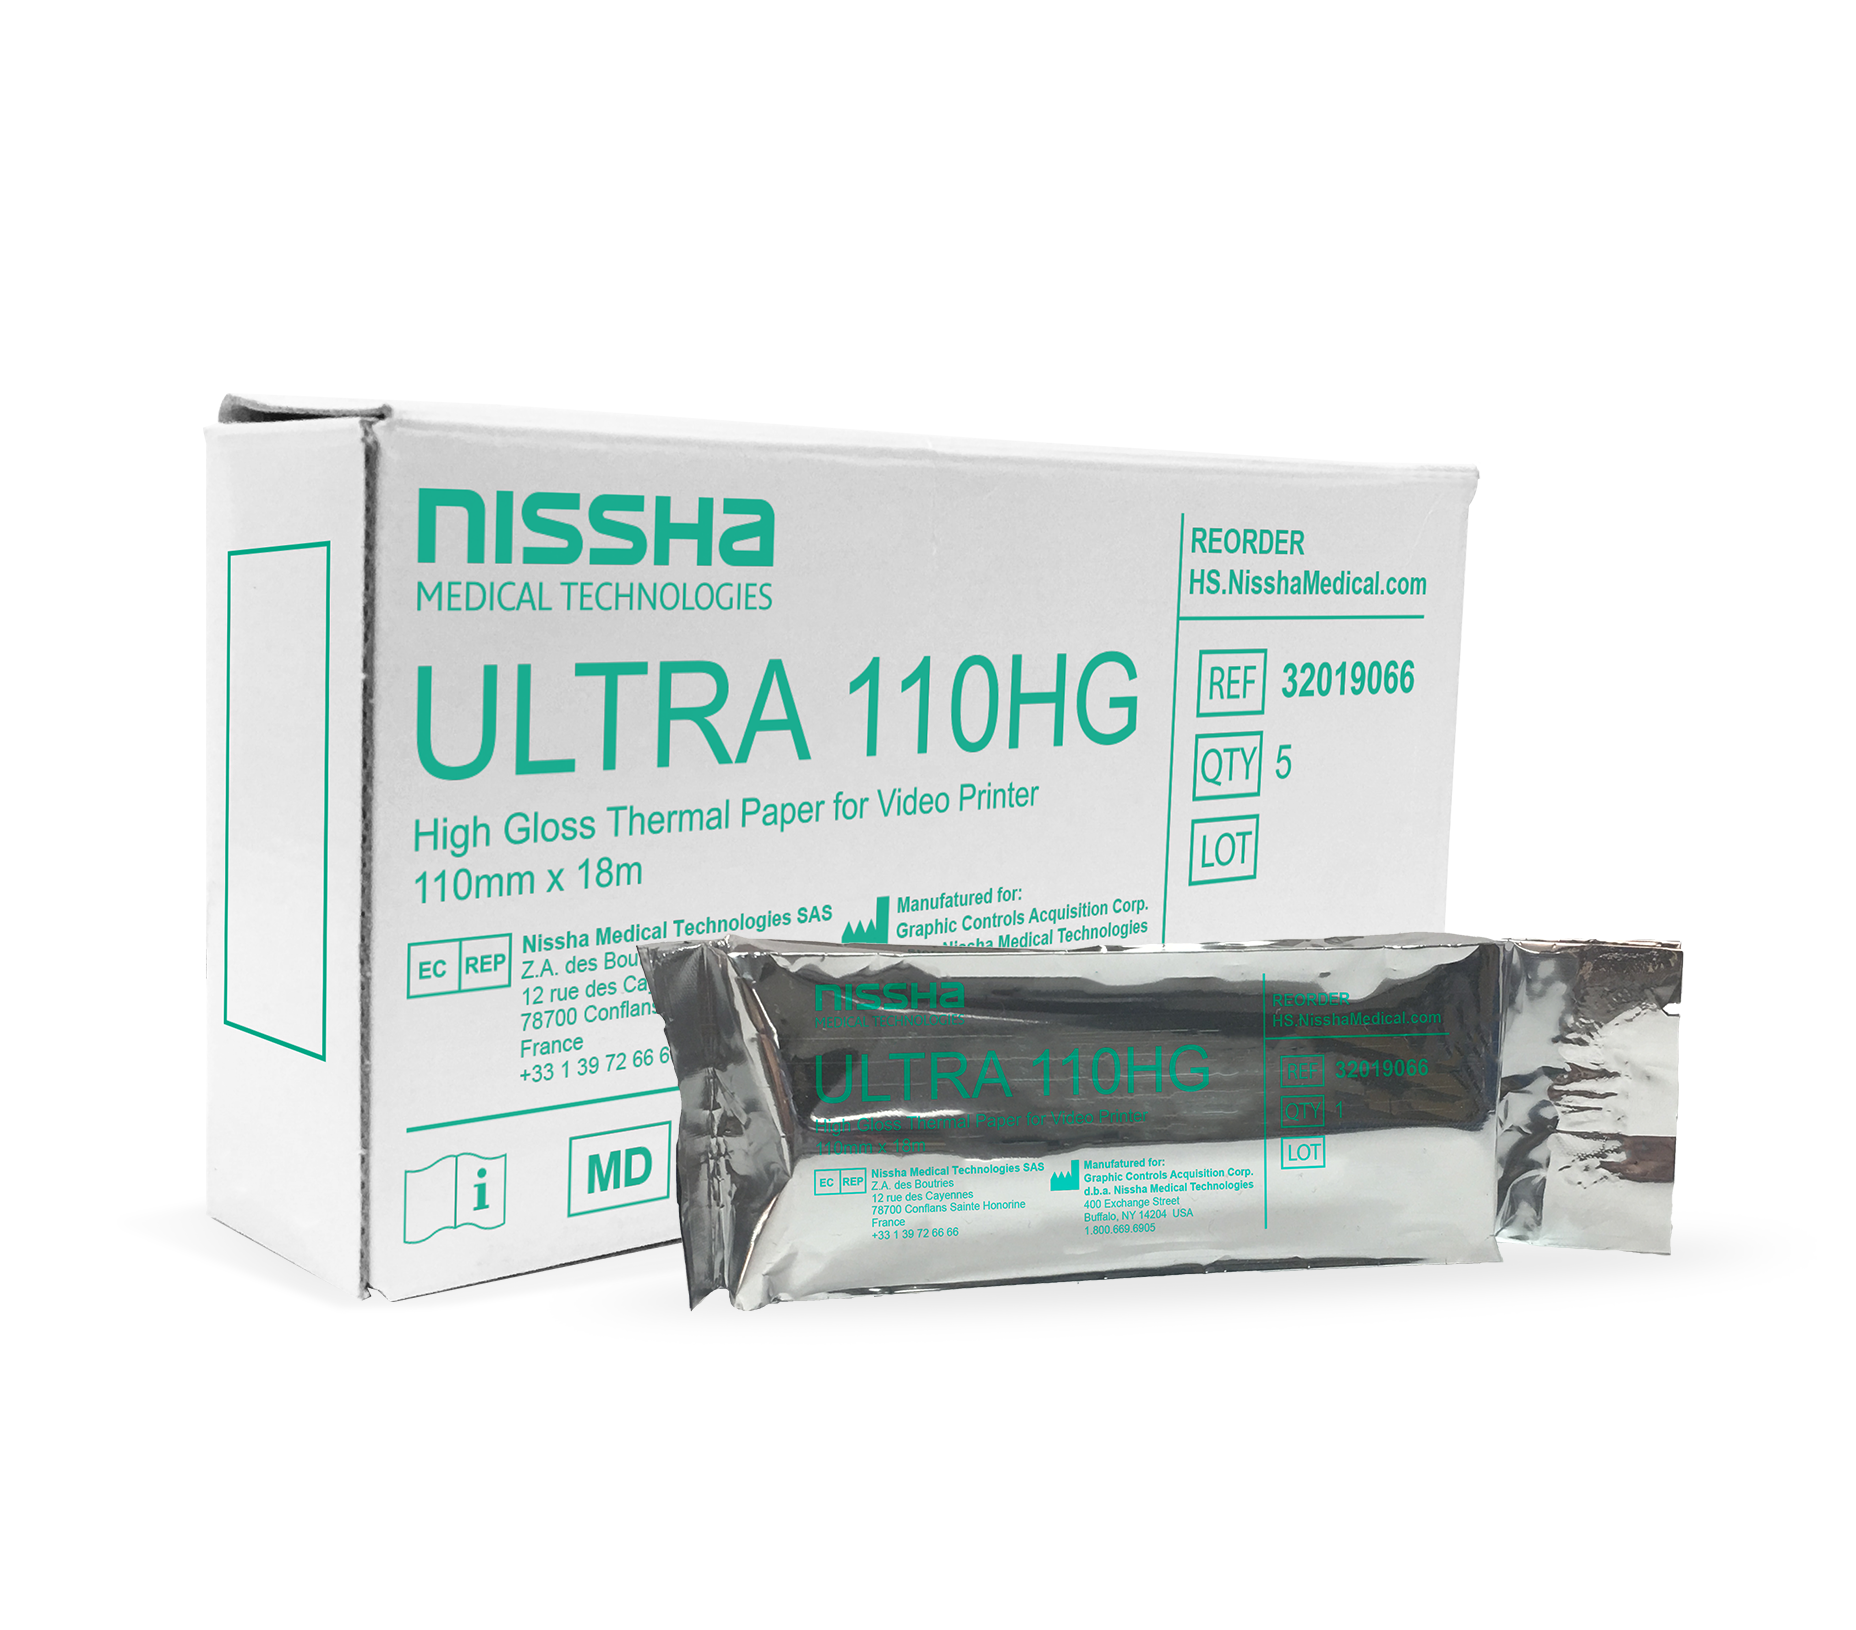 NMT-NISSHA MEDICAL TECHNOLOGIES NMT ULTRA 110HG THERMAL VIDEO PAPER